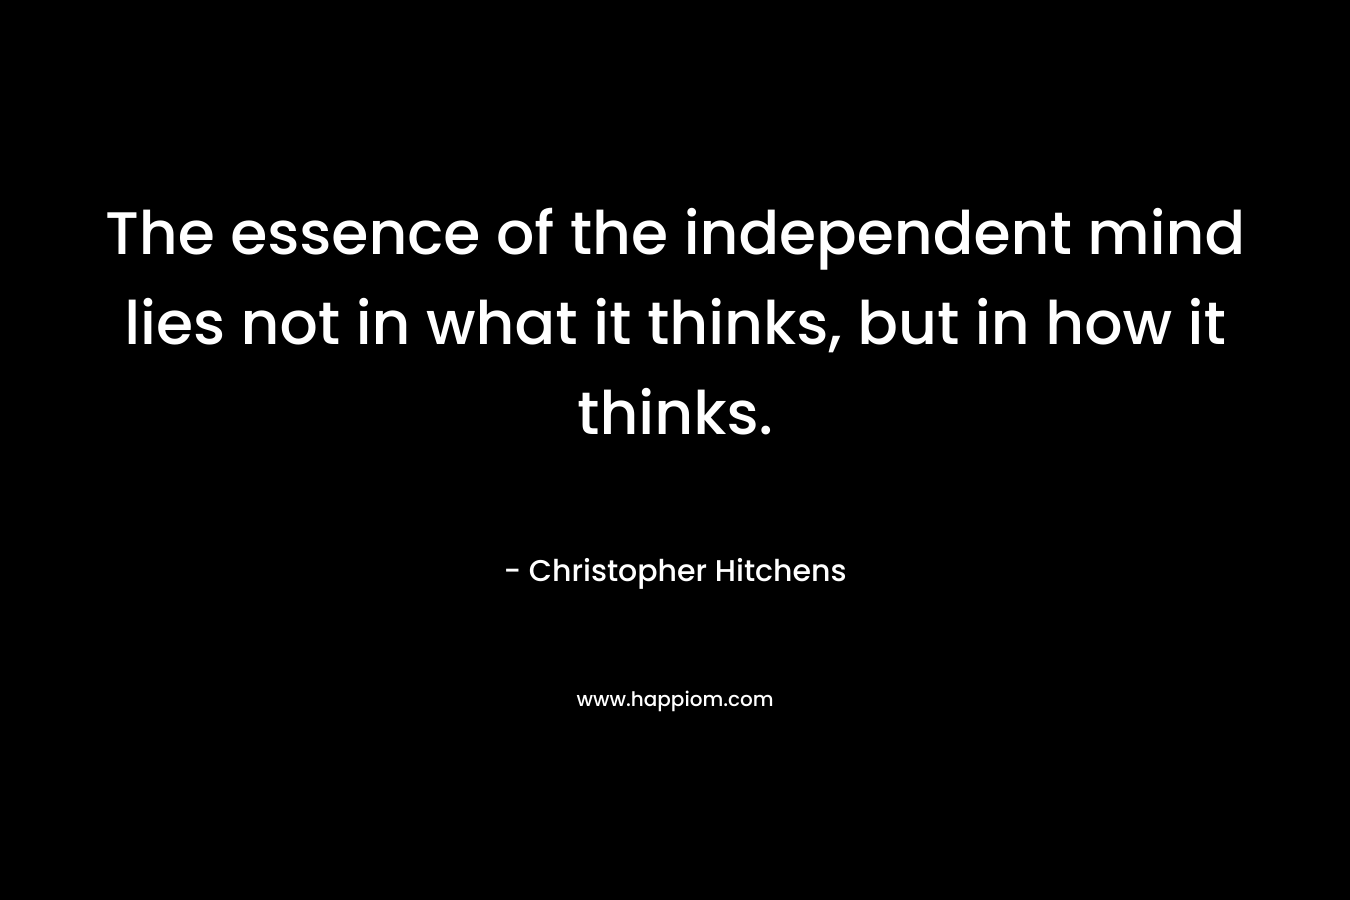 The essence of the independent mind lies not in what it thinks, but in how it thinks.